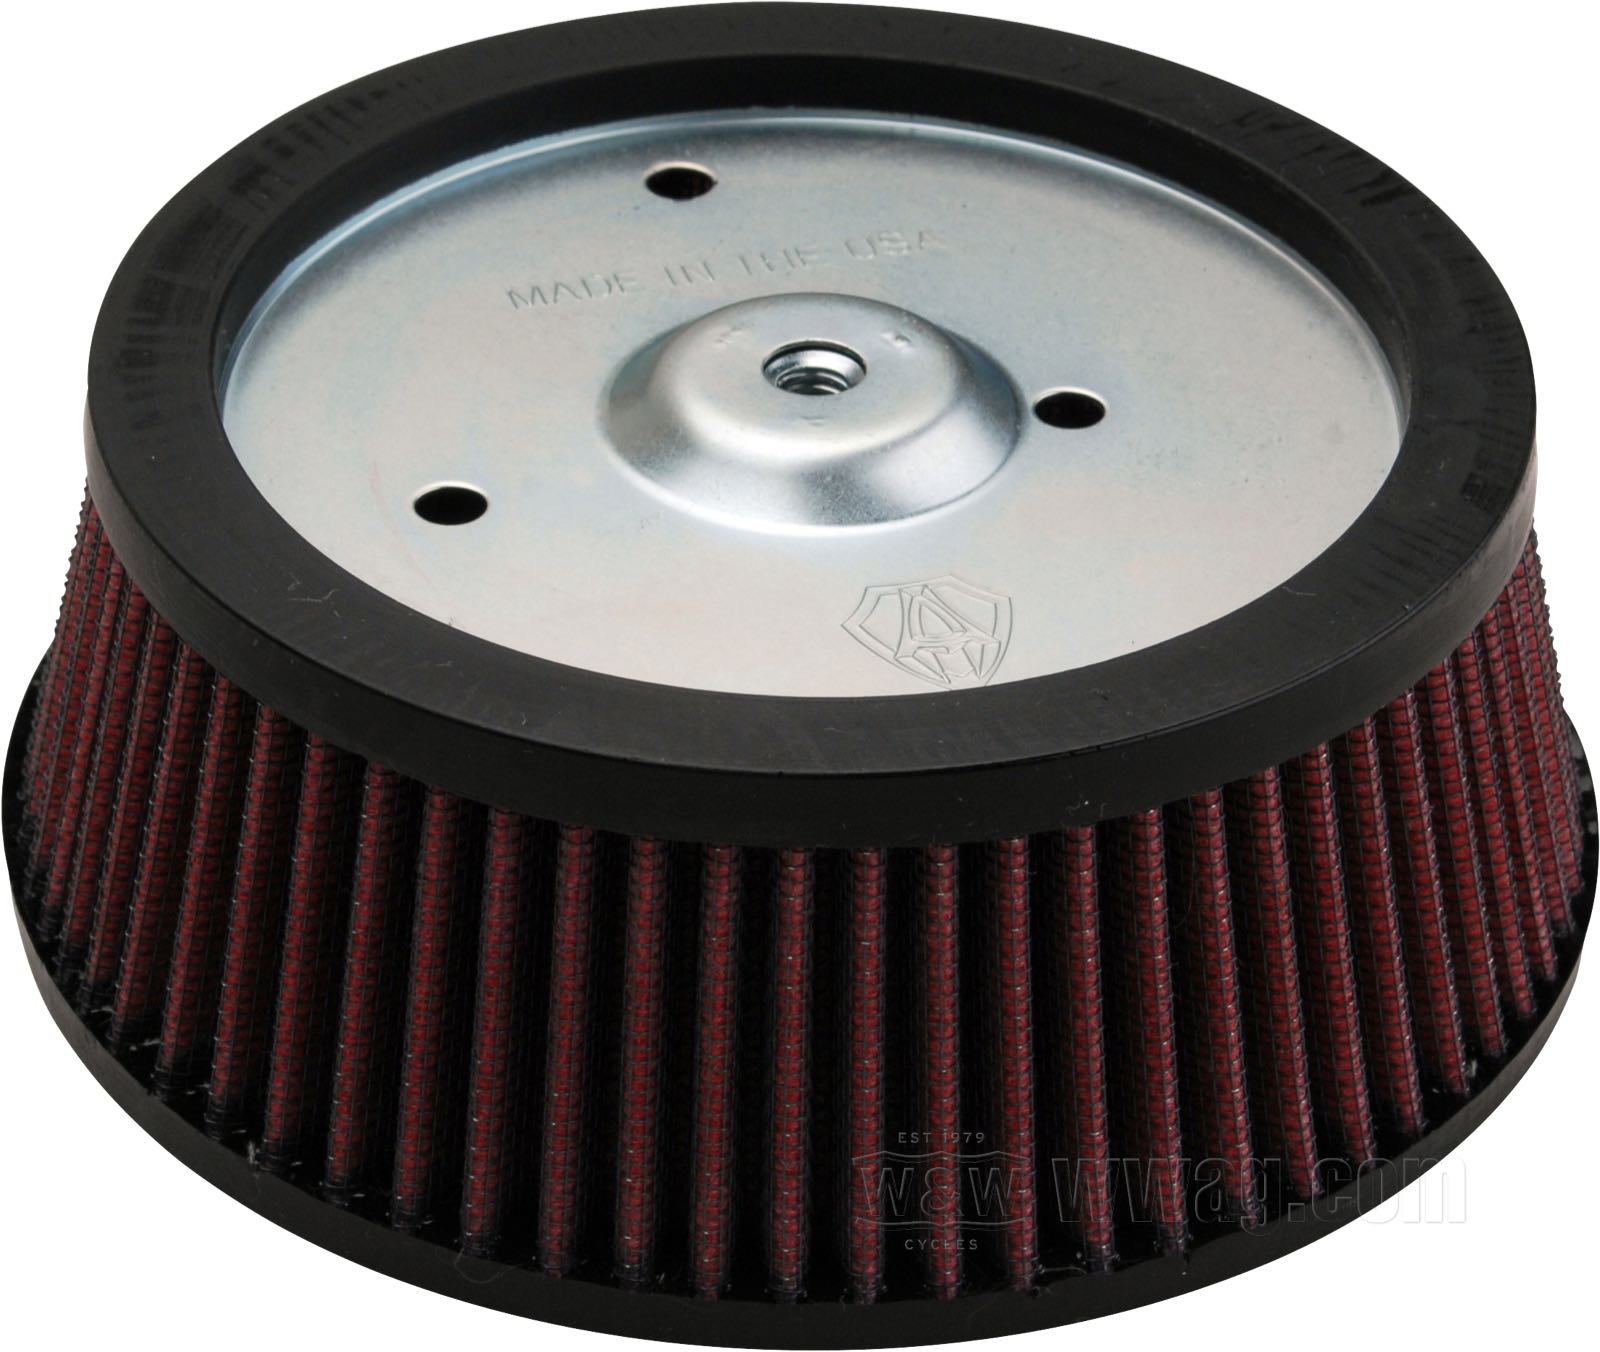 W&W Cycles - Filter Element for Arlen Ness Big Sucker Air Cleaner for  Harley-Davidson